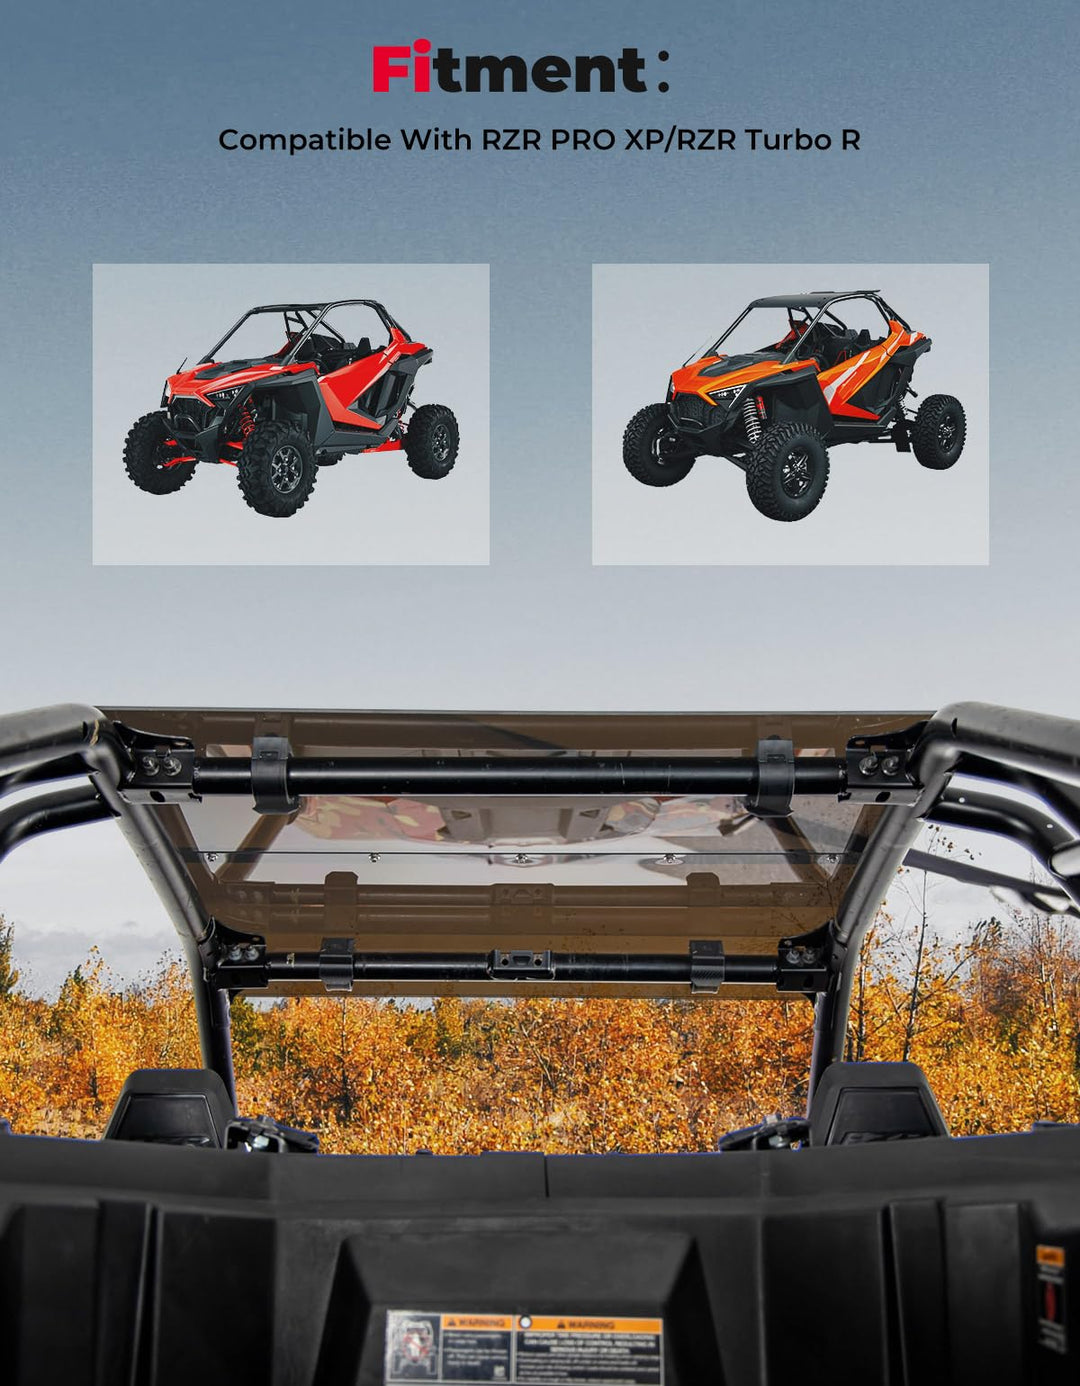 Heavy Duty Tinted PC Roof Top for RZR PRO XP/Turbo R - Kemimoto